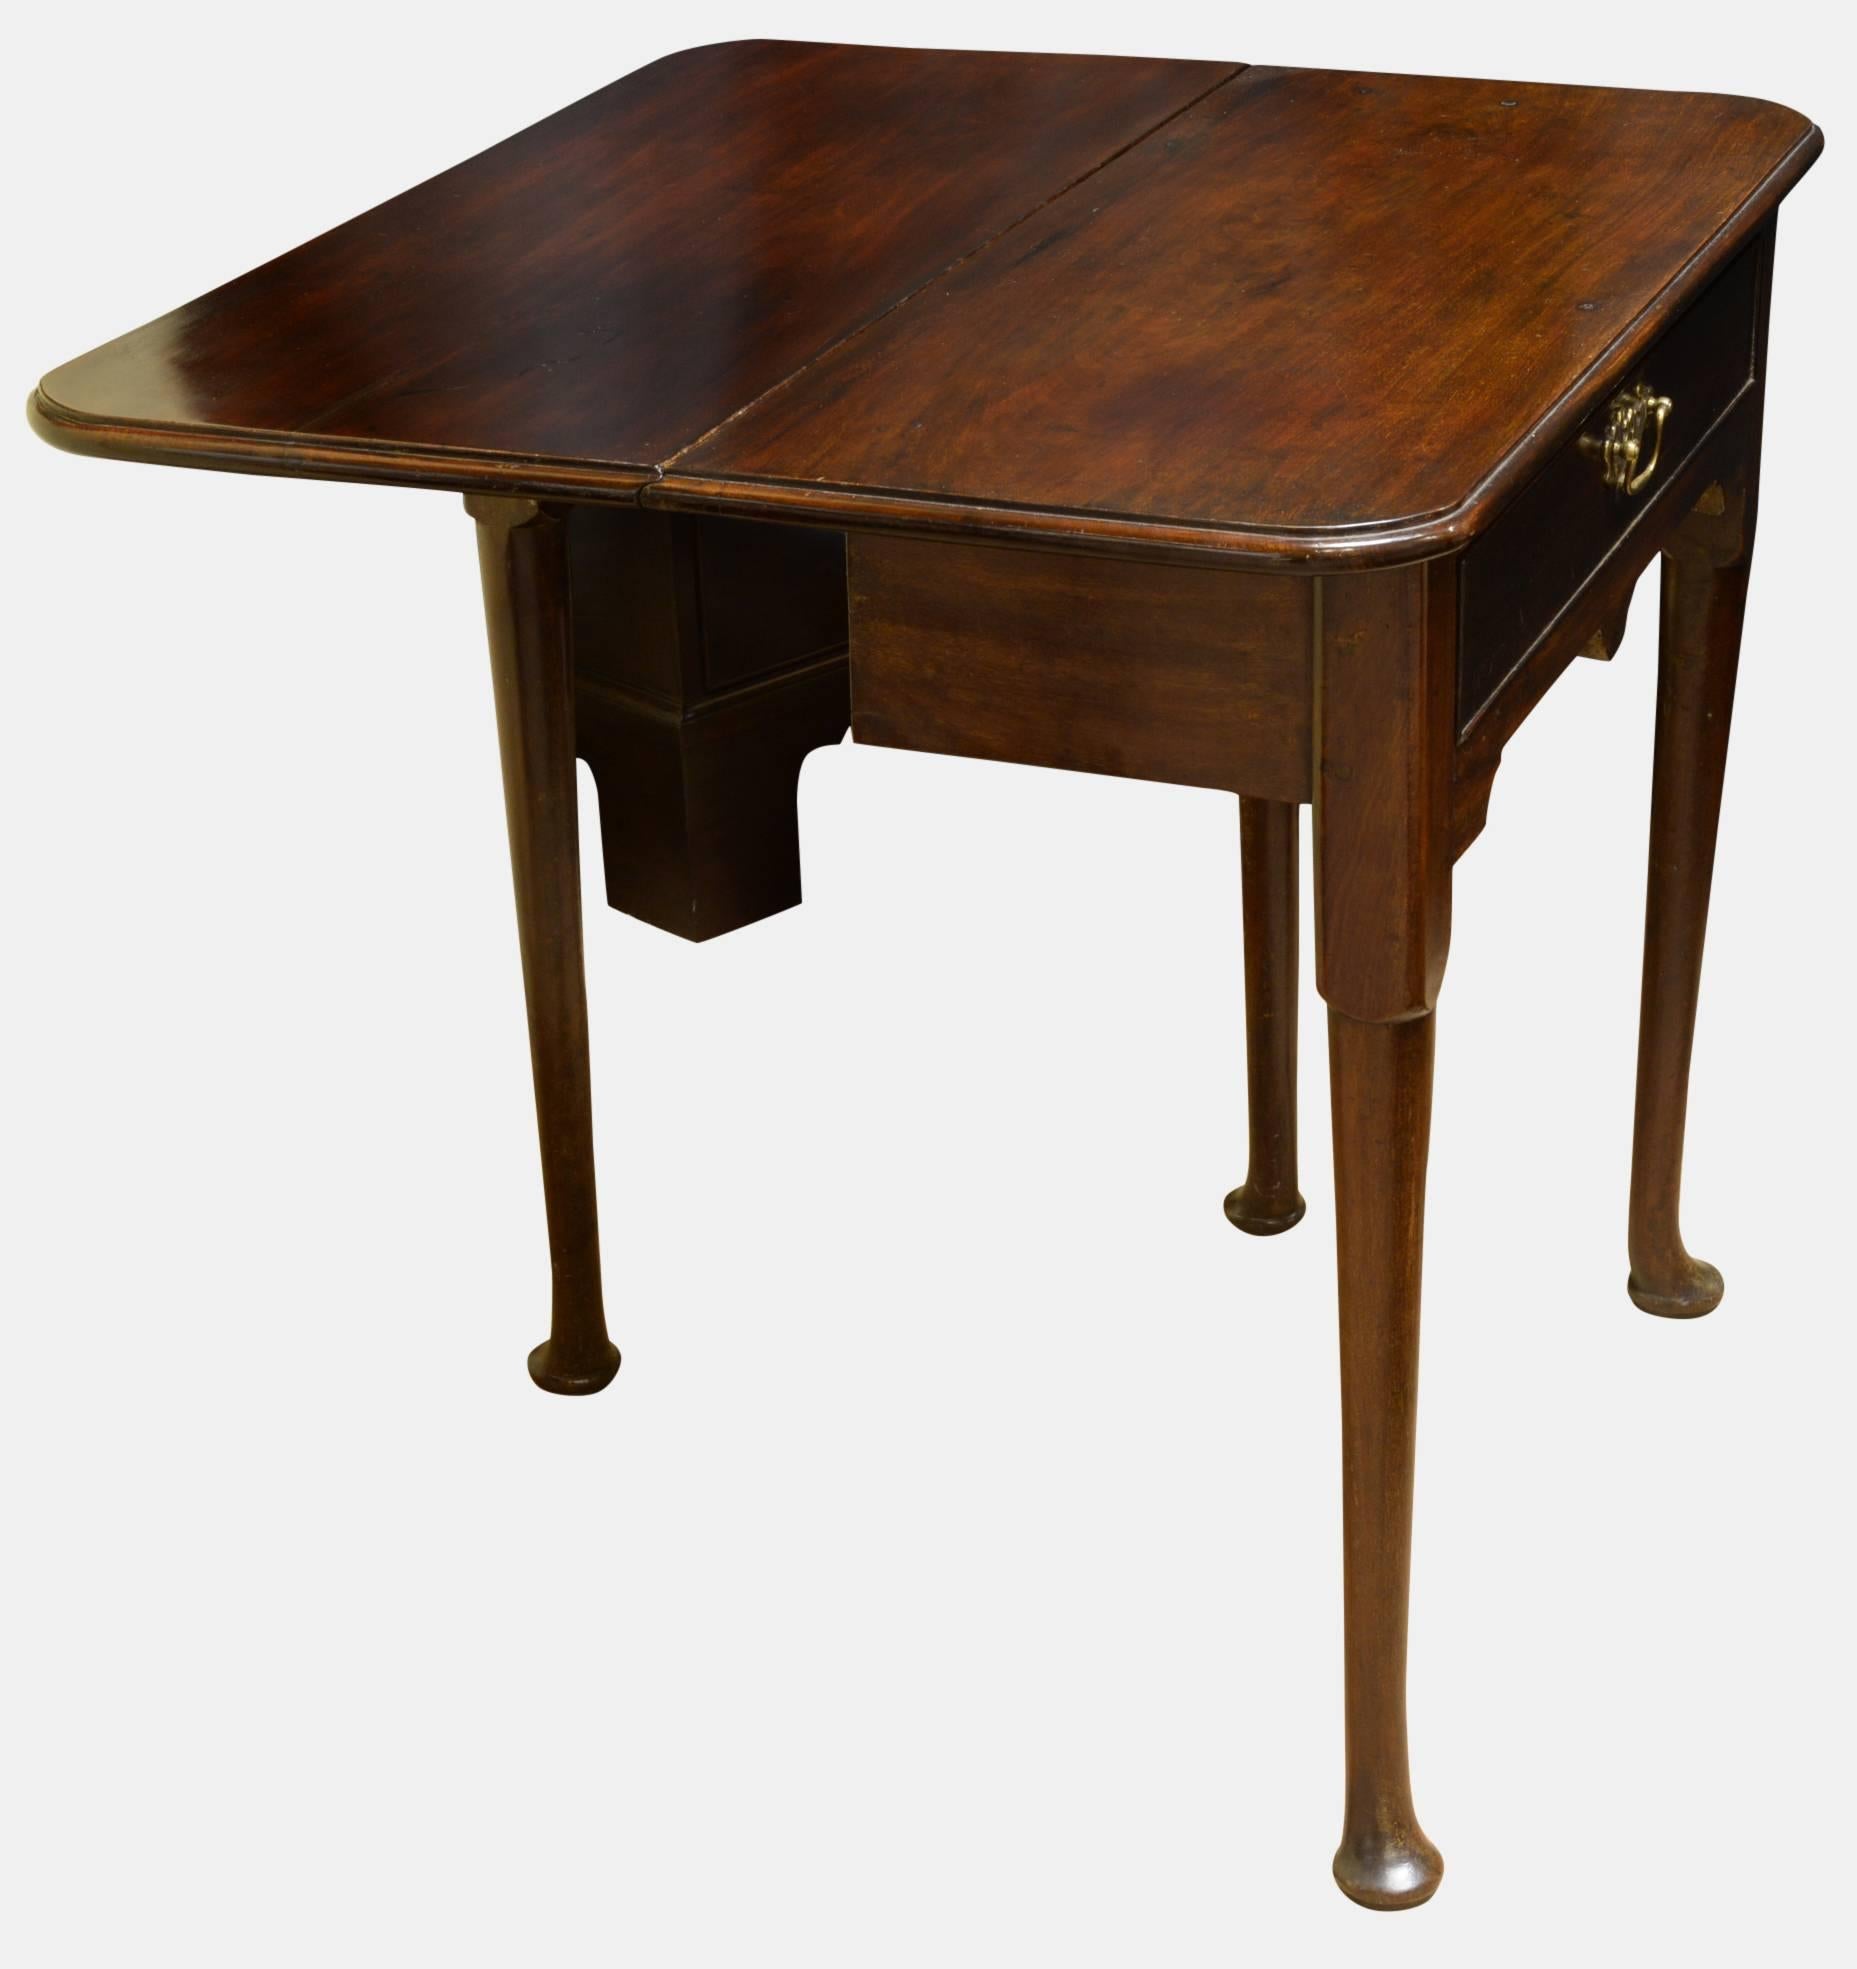 Oak lined red walnut single drawer and single flap gate leg table. With original handle,

circa 1725.